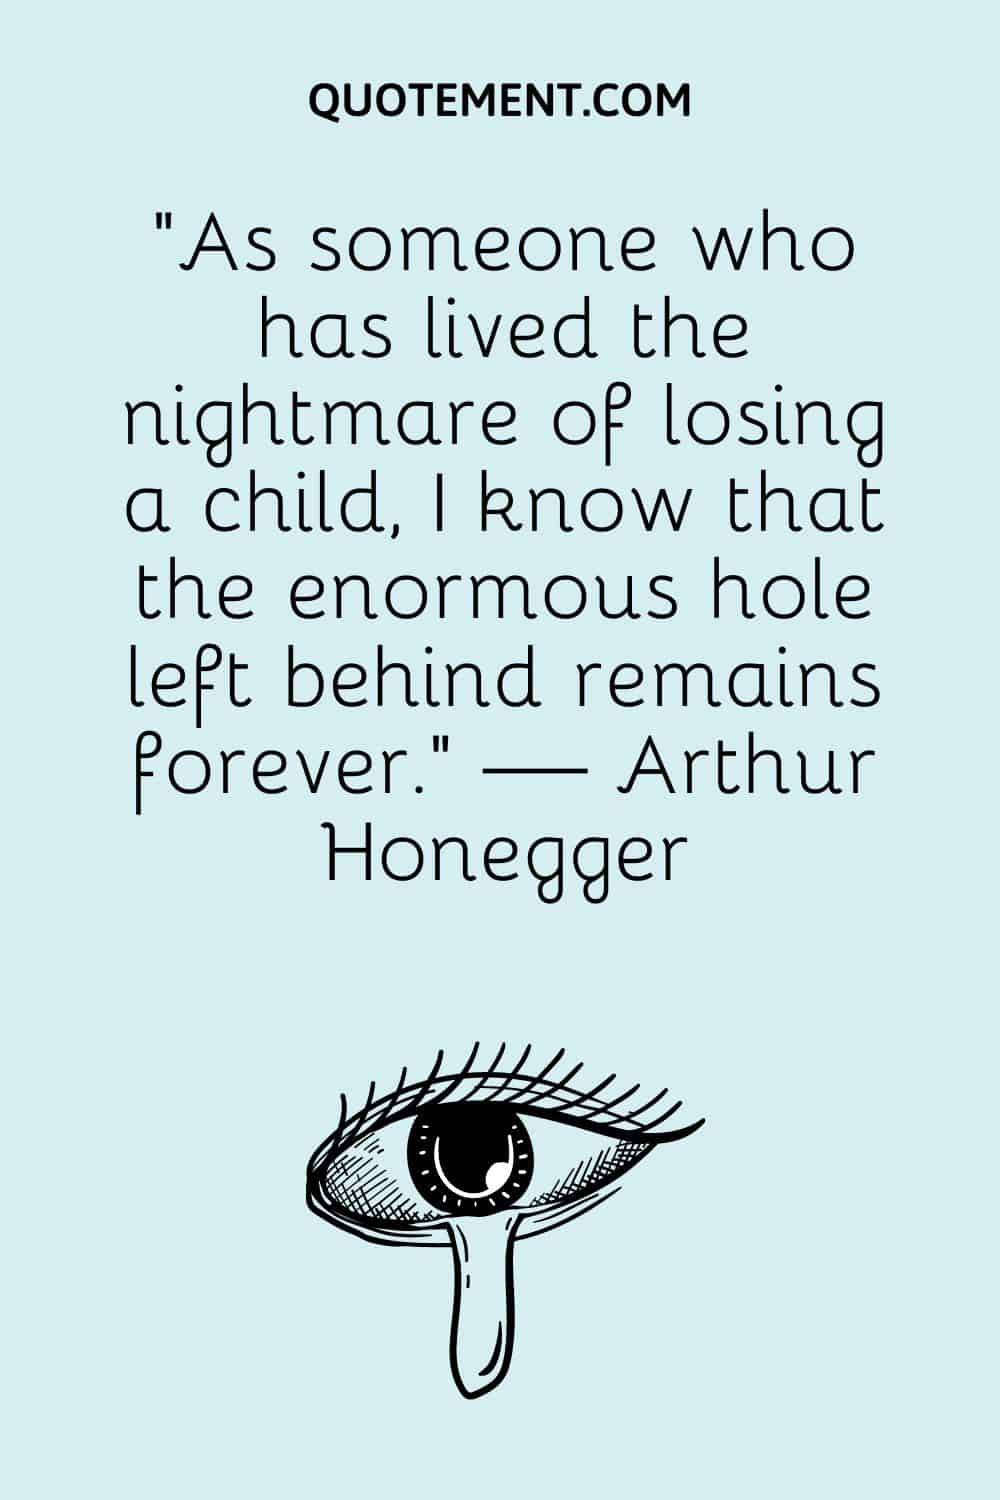 “As someone who has lived the nightmare of losing a child, I know that the enormous hole left behind remains forever.” — Arthur Honegger